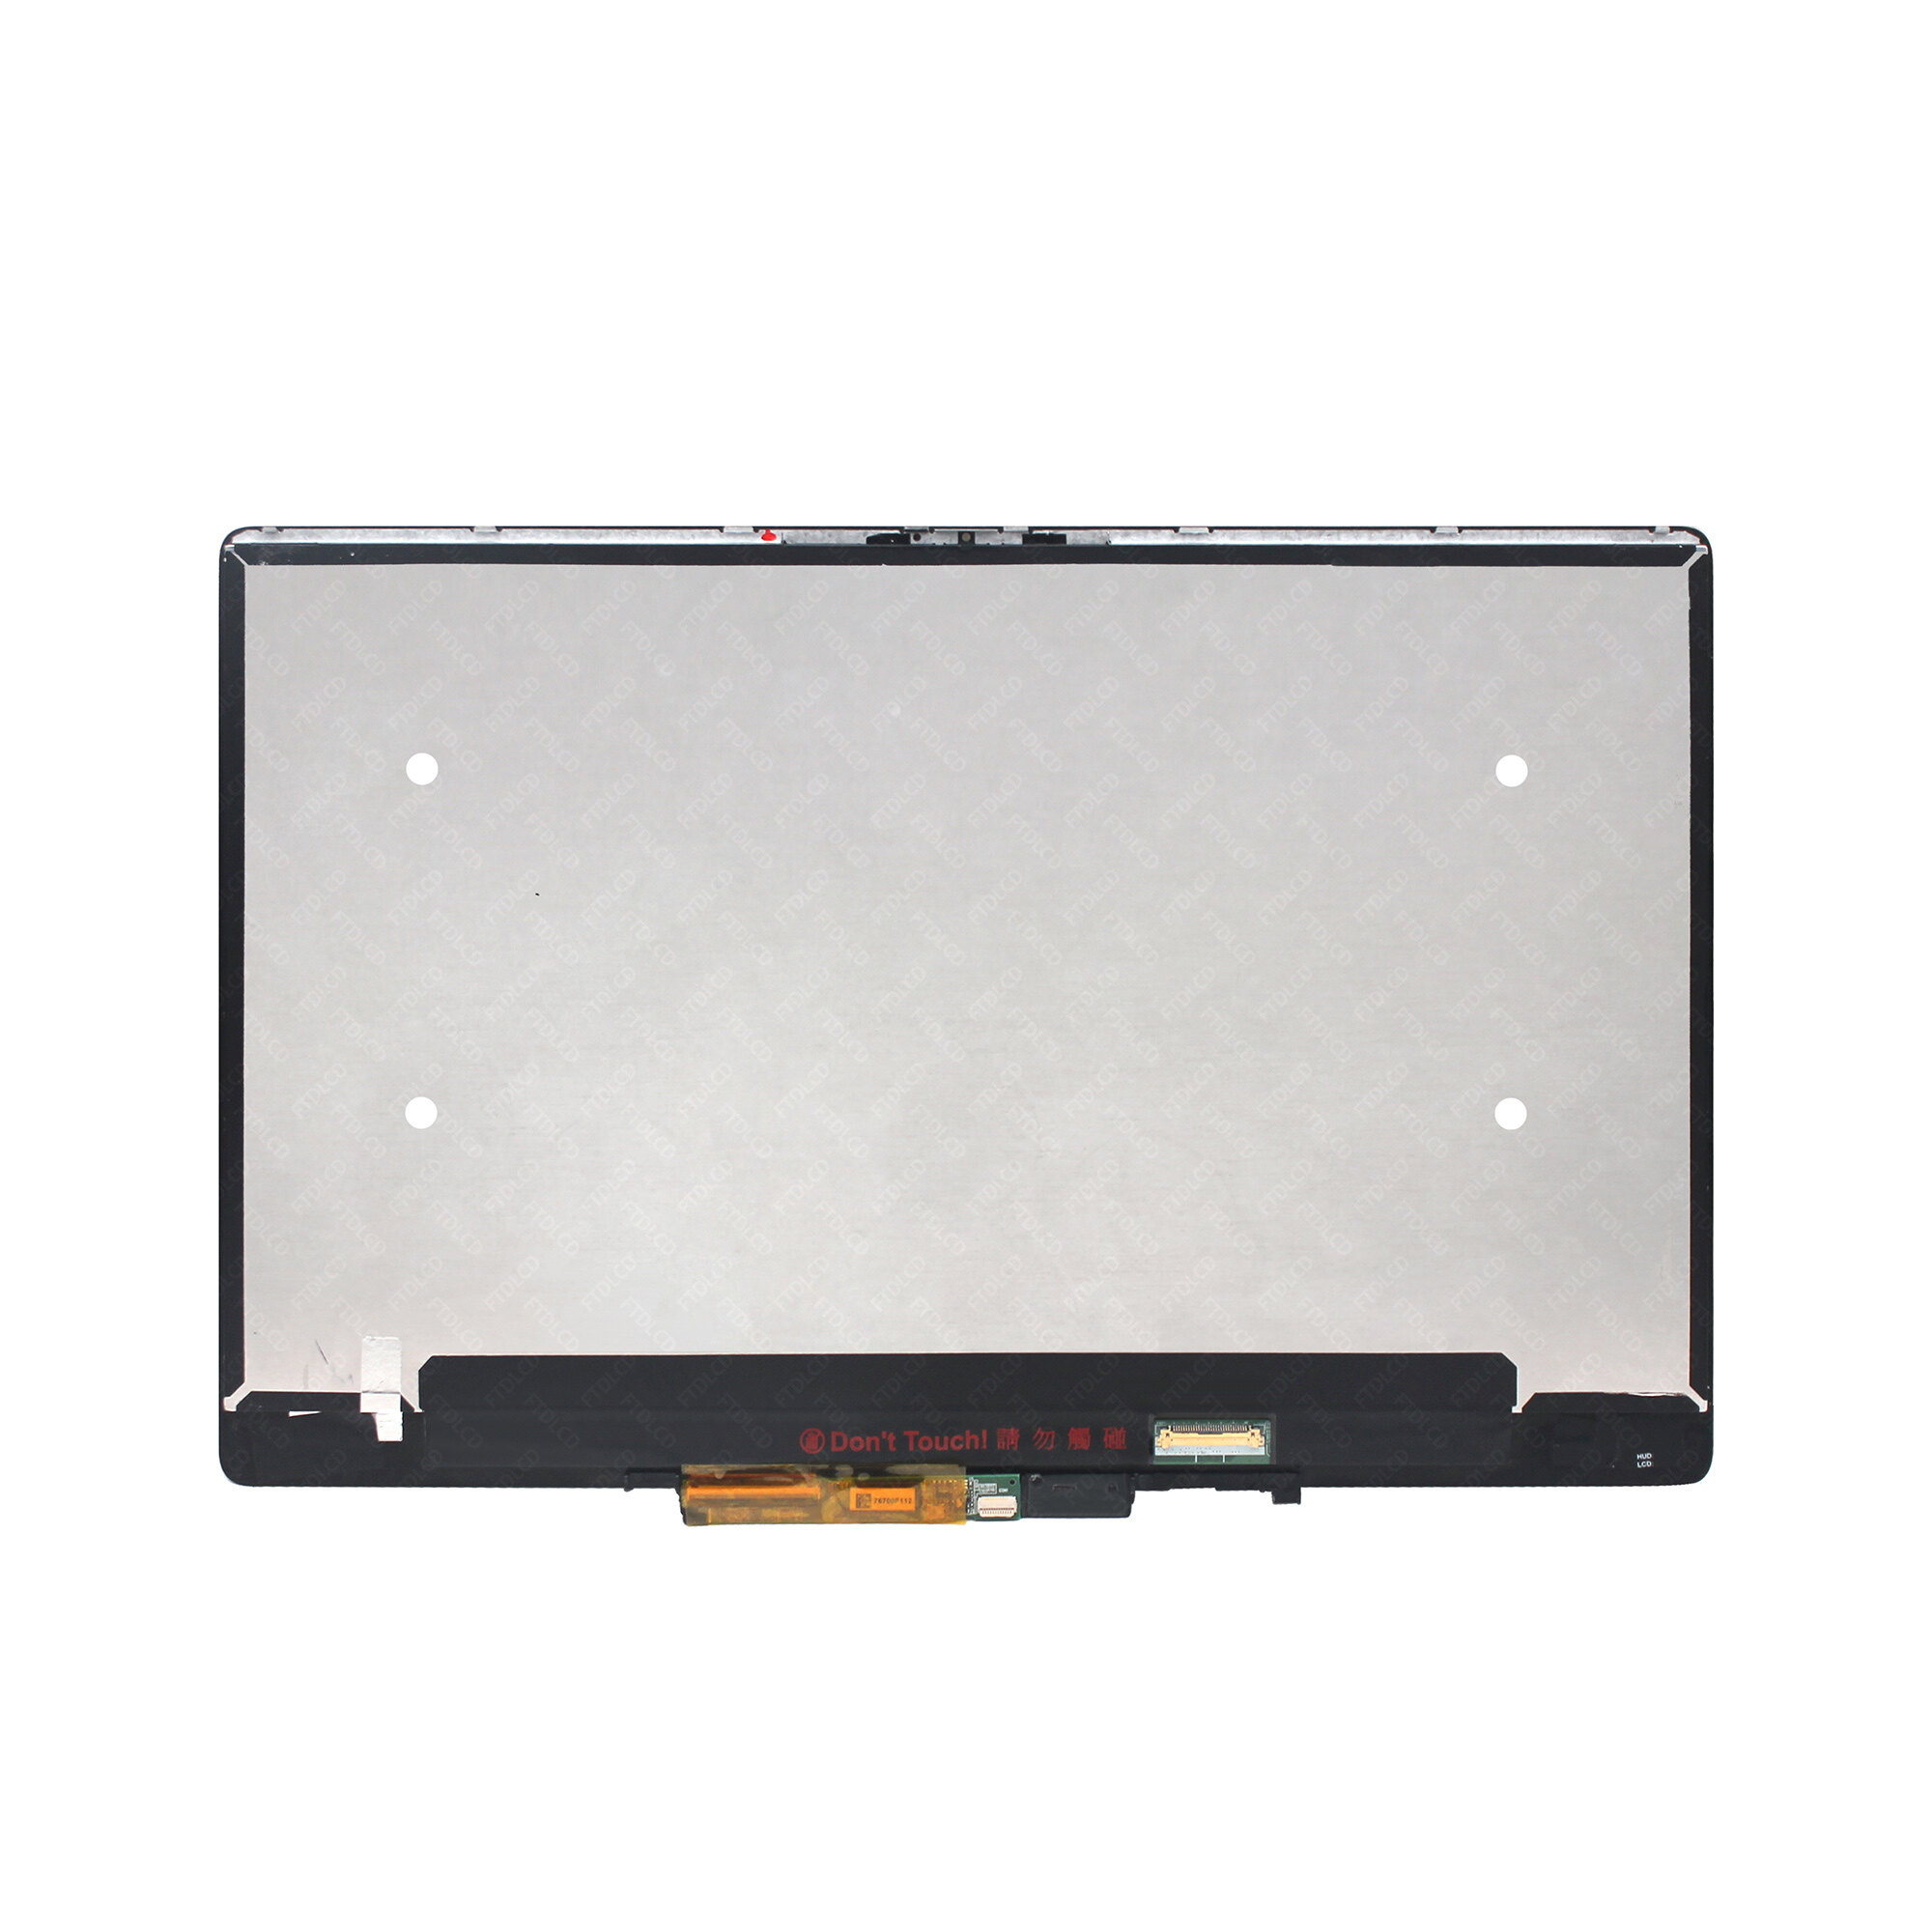 Kreplacement LCD Display Touchscreen Digitizer Assembly for Dell Inspiron 13 7386 N133DCE-GP2